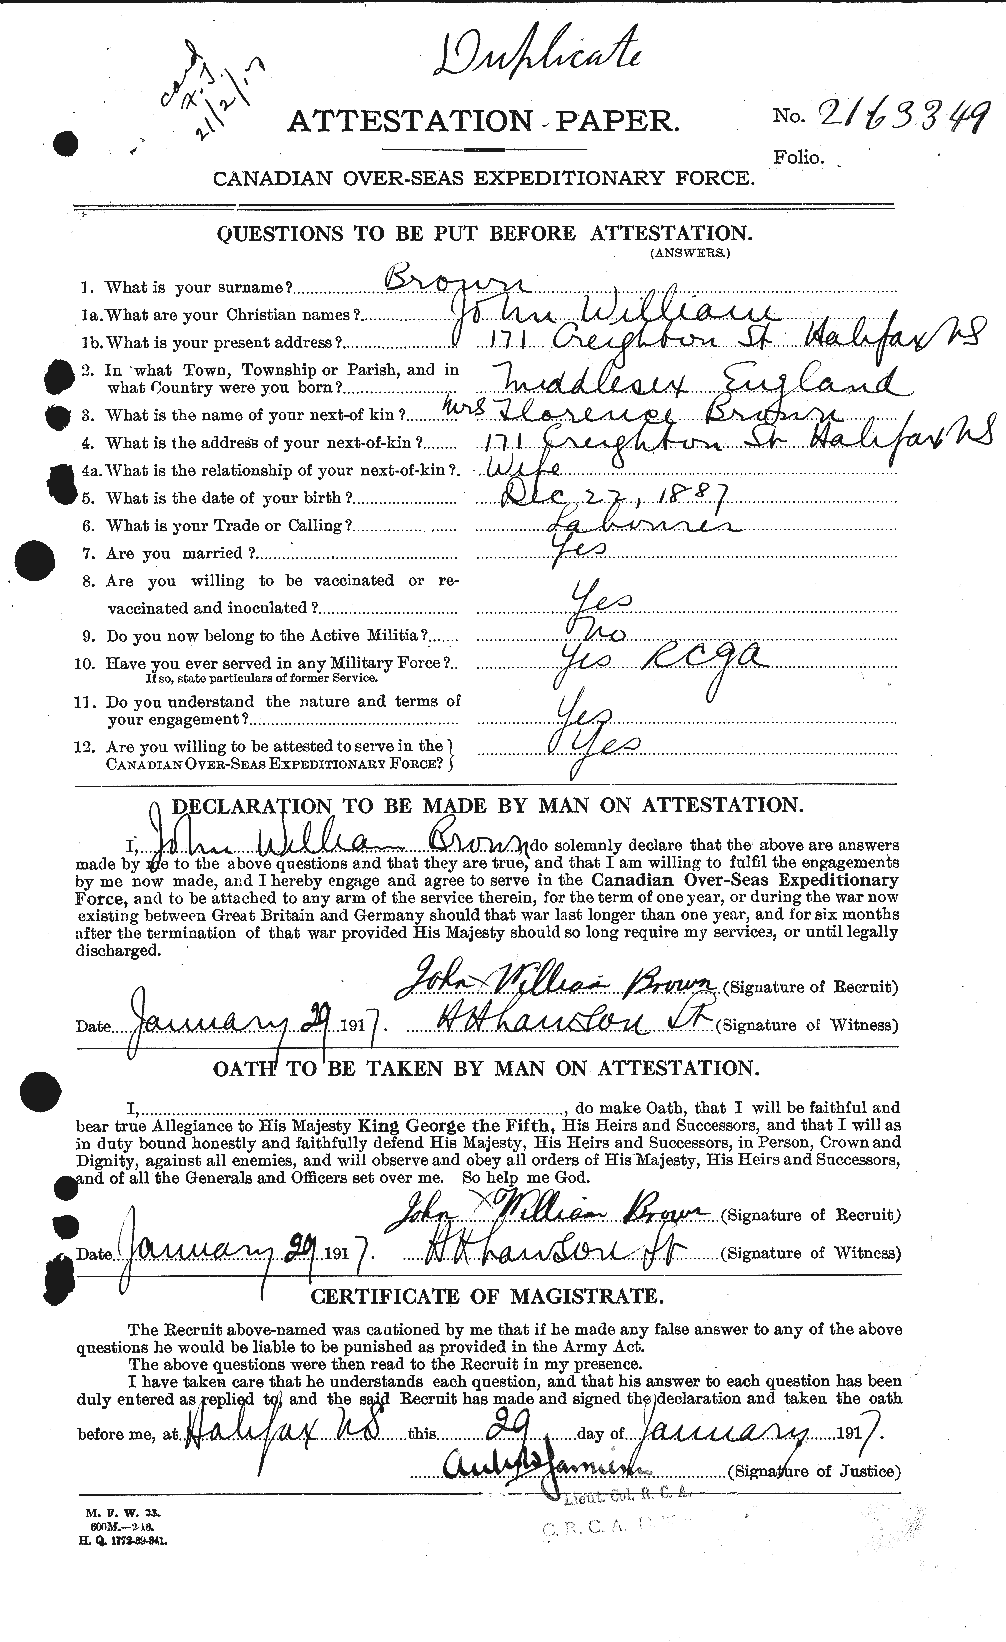 Personnel Records of the First World War - CEF 265905a